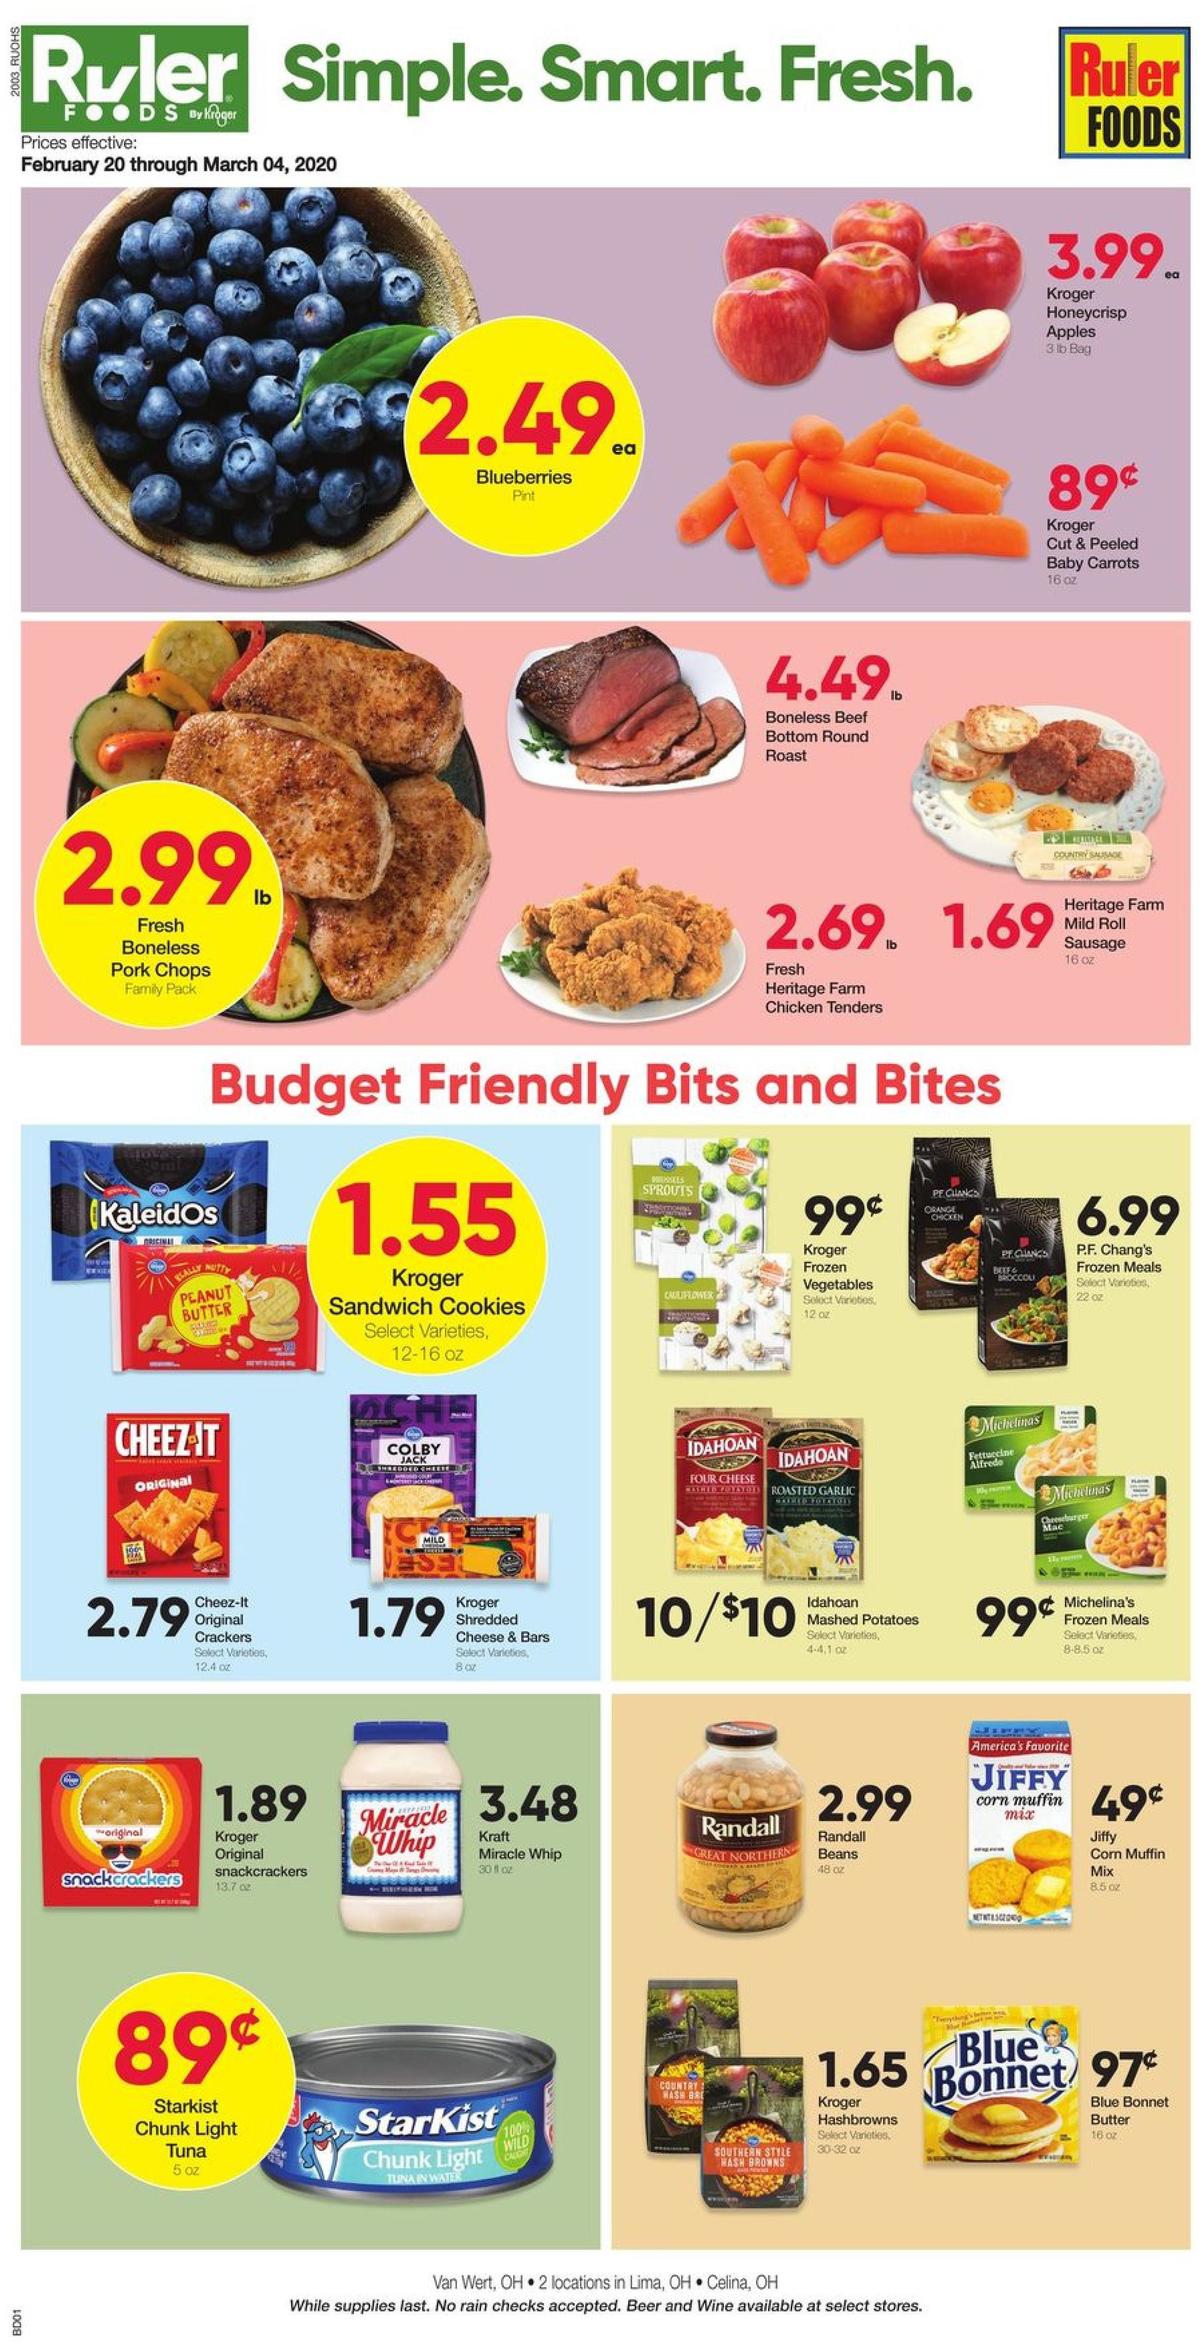 Ruler Foods Weekly Ad from February 20